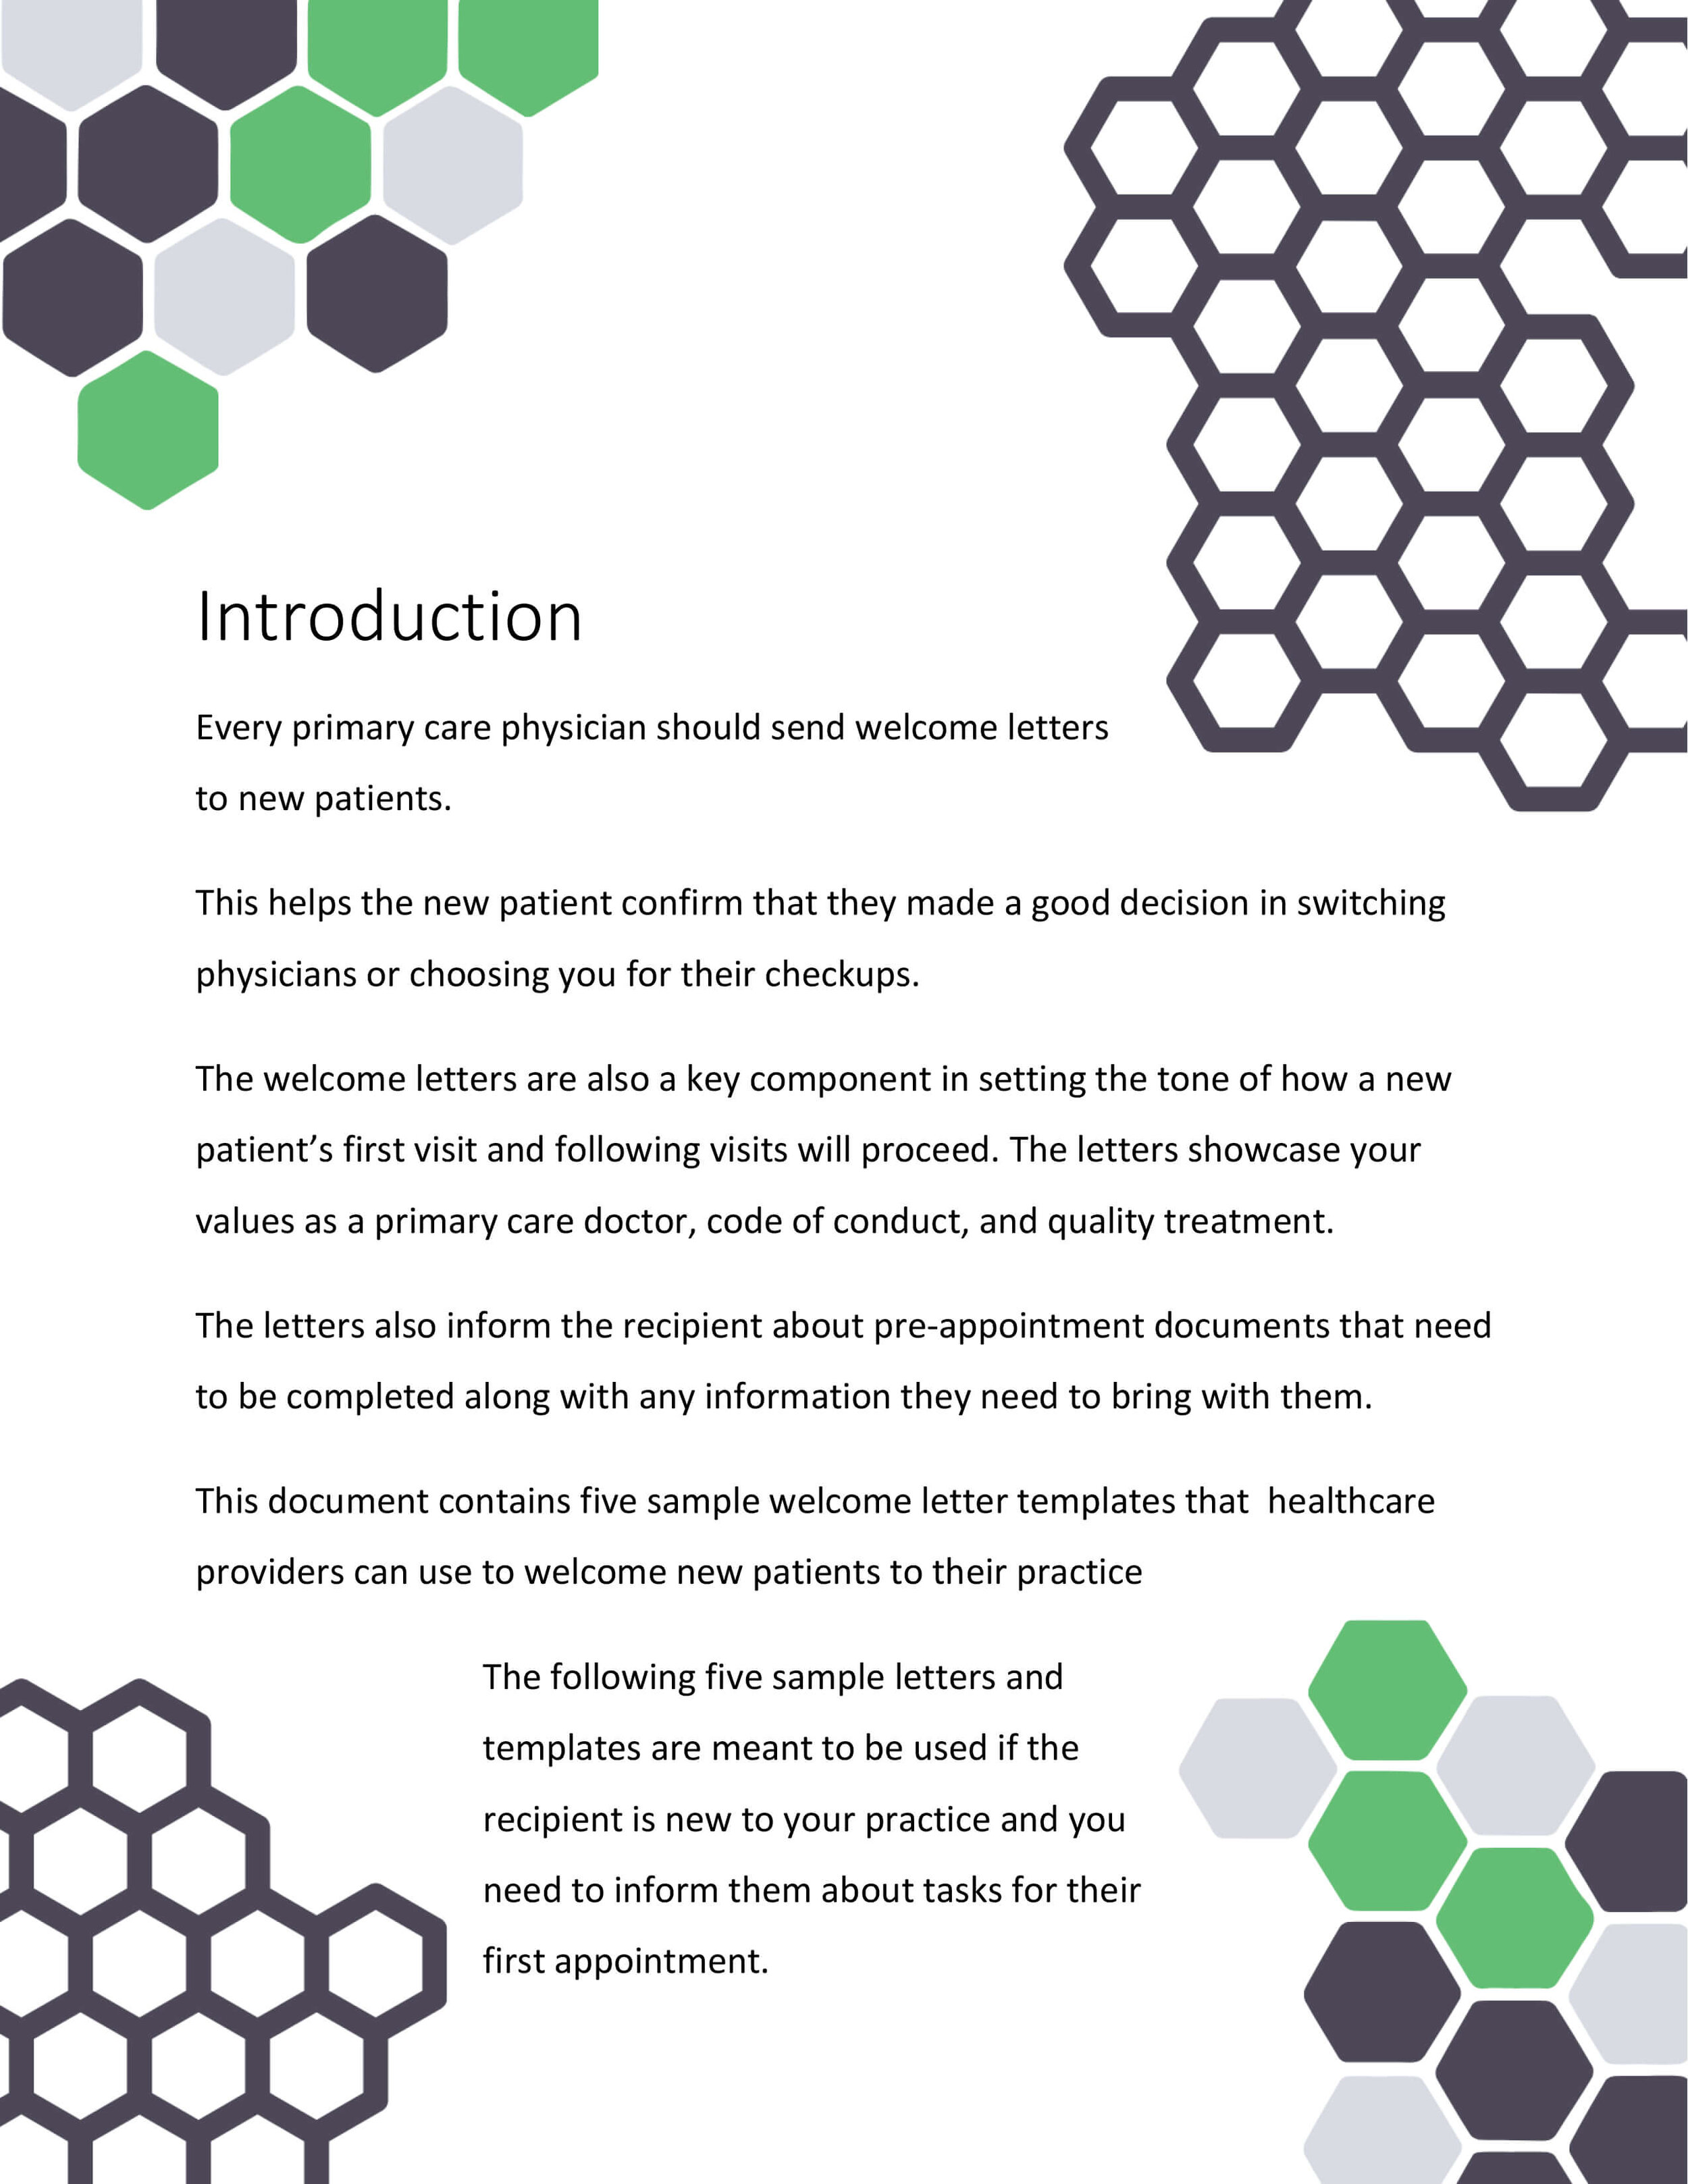 5 New Patient Welcome Letter Templates for Primary Care Physicians-2.jpg